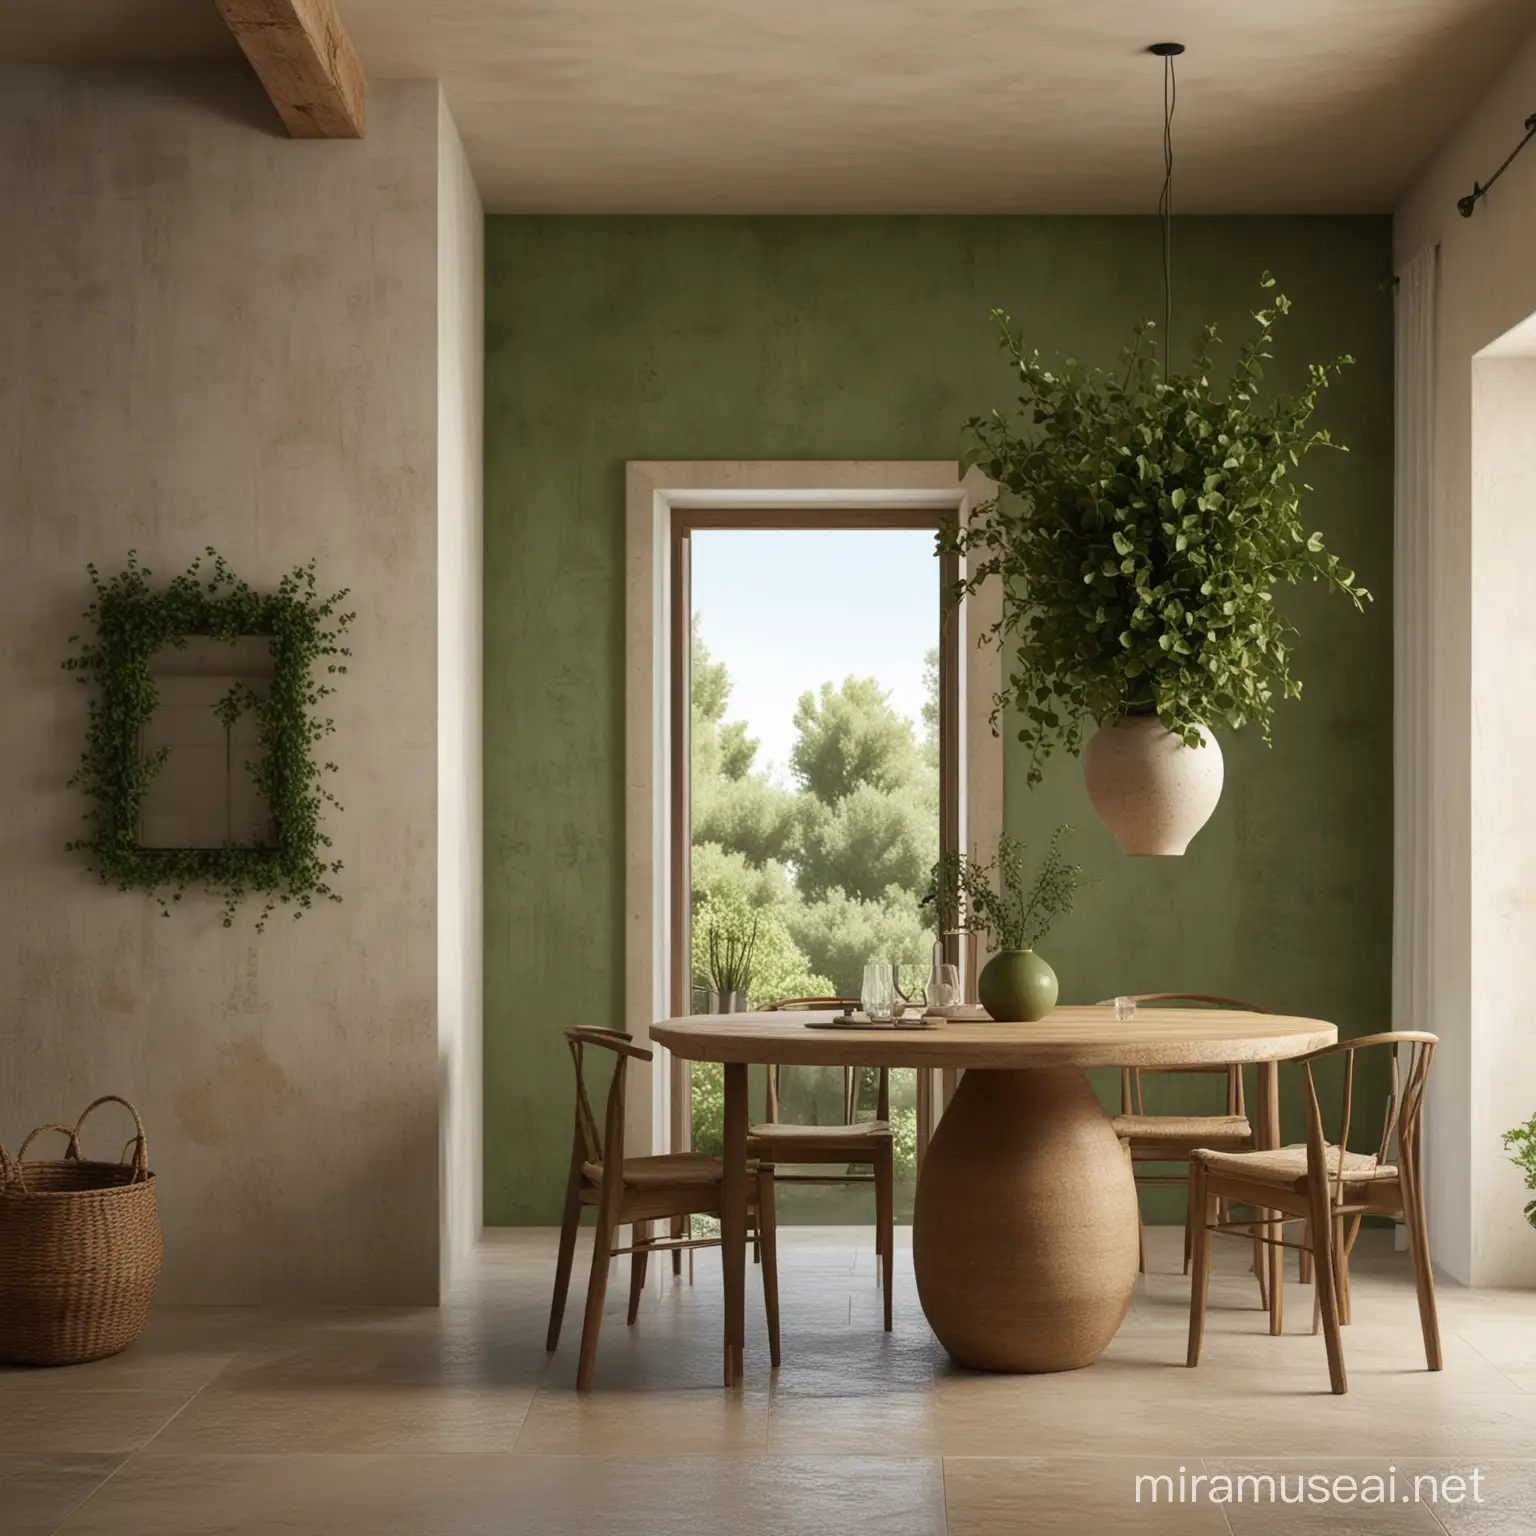 
Close up  of an Greek inspired monolithic contemporary minimal but rustic Mallorcan house dining room of a an empty ivy green colored wall close up, furnished in gorgeous Wabi Sabi huge vase as decoration, in a high quality architectural visualization, using 3D modeling software with photorealistic materials and advanced lighting techniques